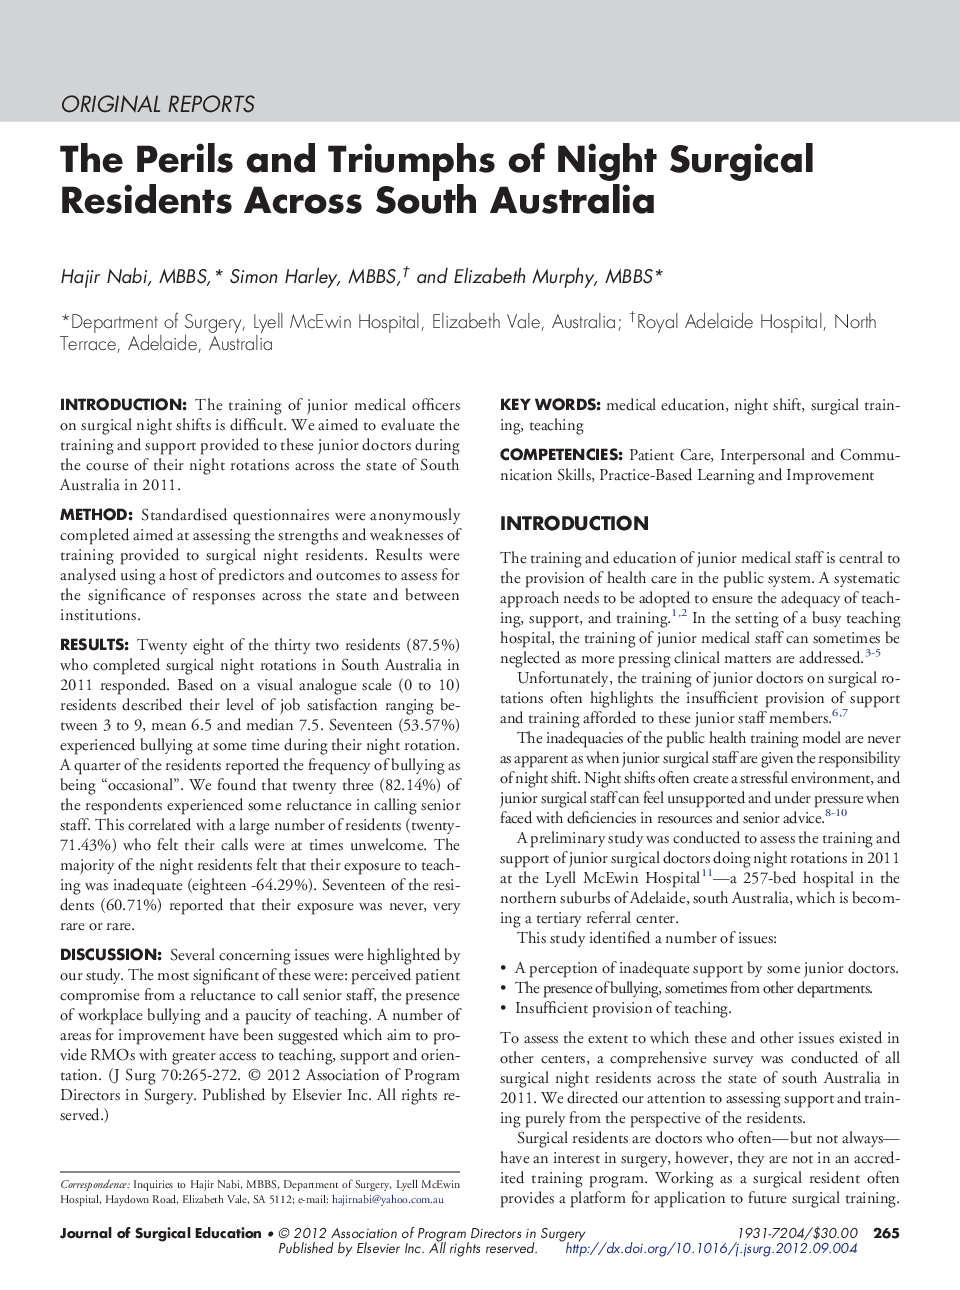 The Perils and Triumphs of Night Surgical Residents Across South Australia